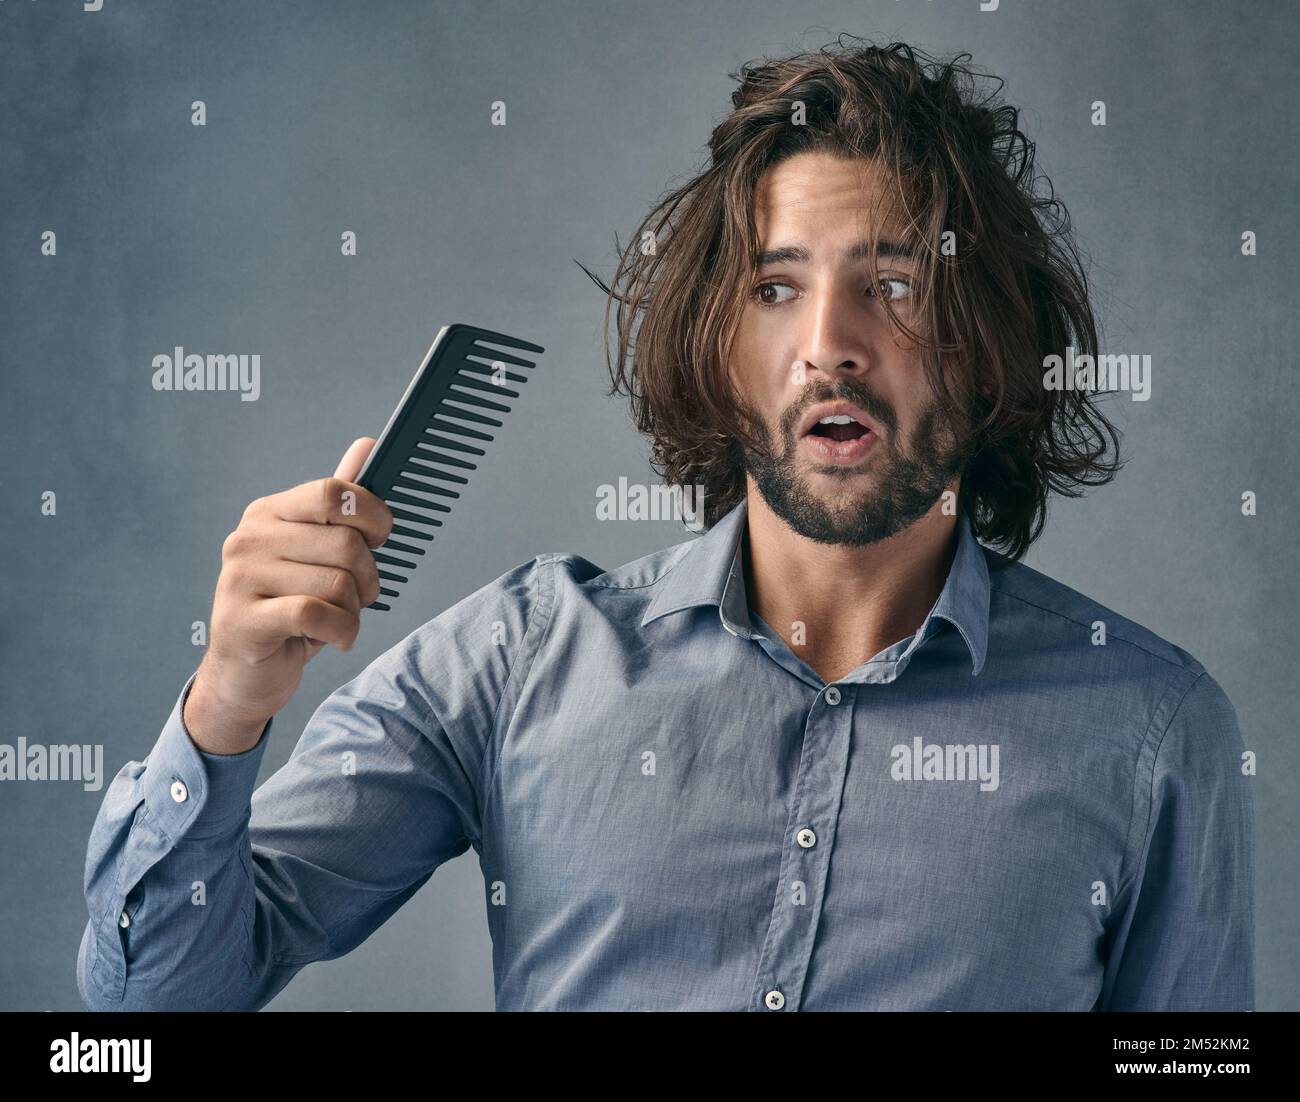 Arent you suppose to fix the mess on my head. a handsome young man looking at the comb after combing his hair. Stock Photo